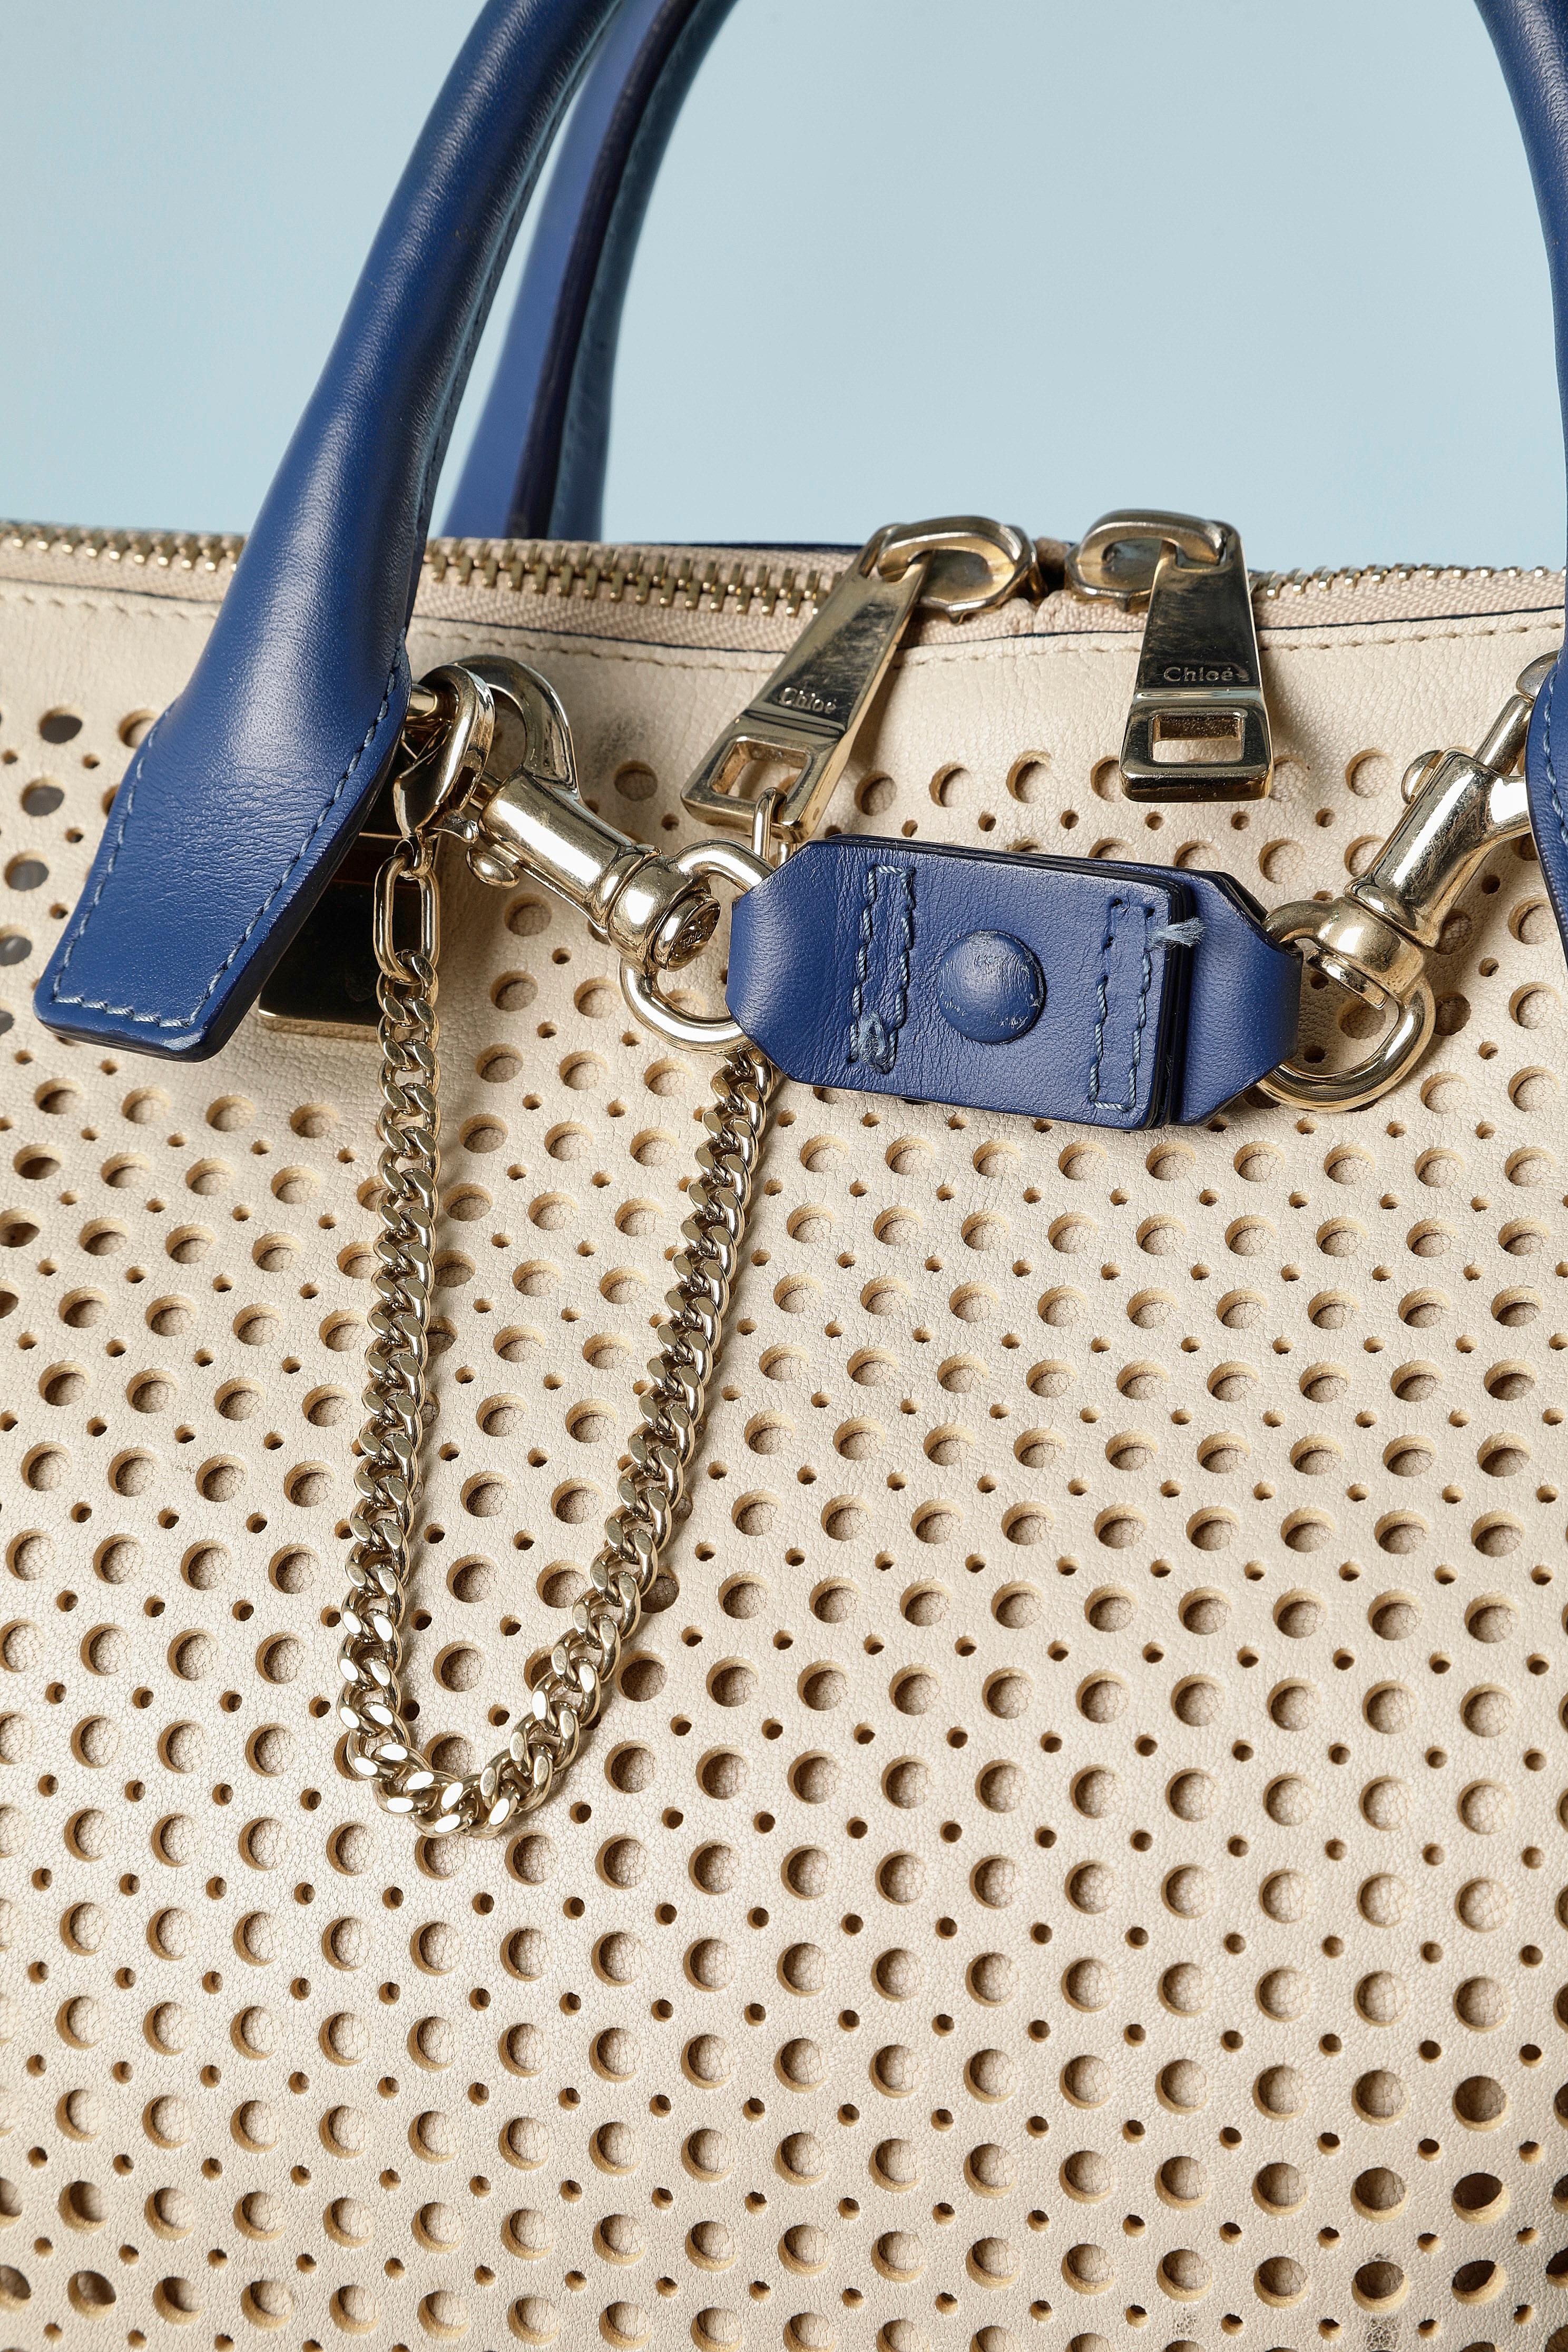 Beige perforated leather bag with blue leather handle and bottom.Zip on the top to close it and chain.  No lining. Shoulder strap is missing. Authenticity card provided. 2 inside pocket with zip.
SIZE 40cm X 25cm X 15 cm 